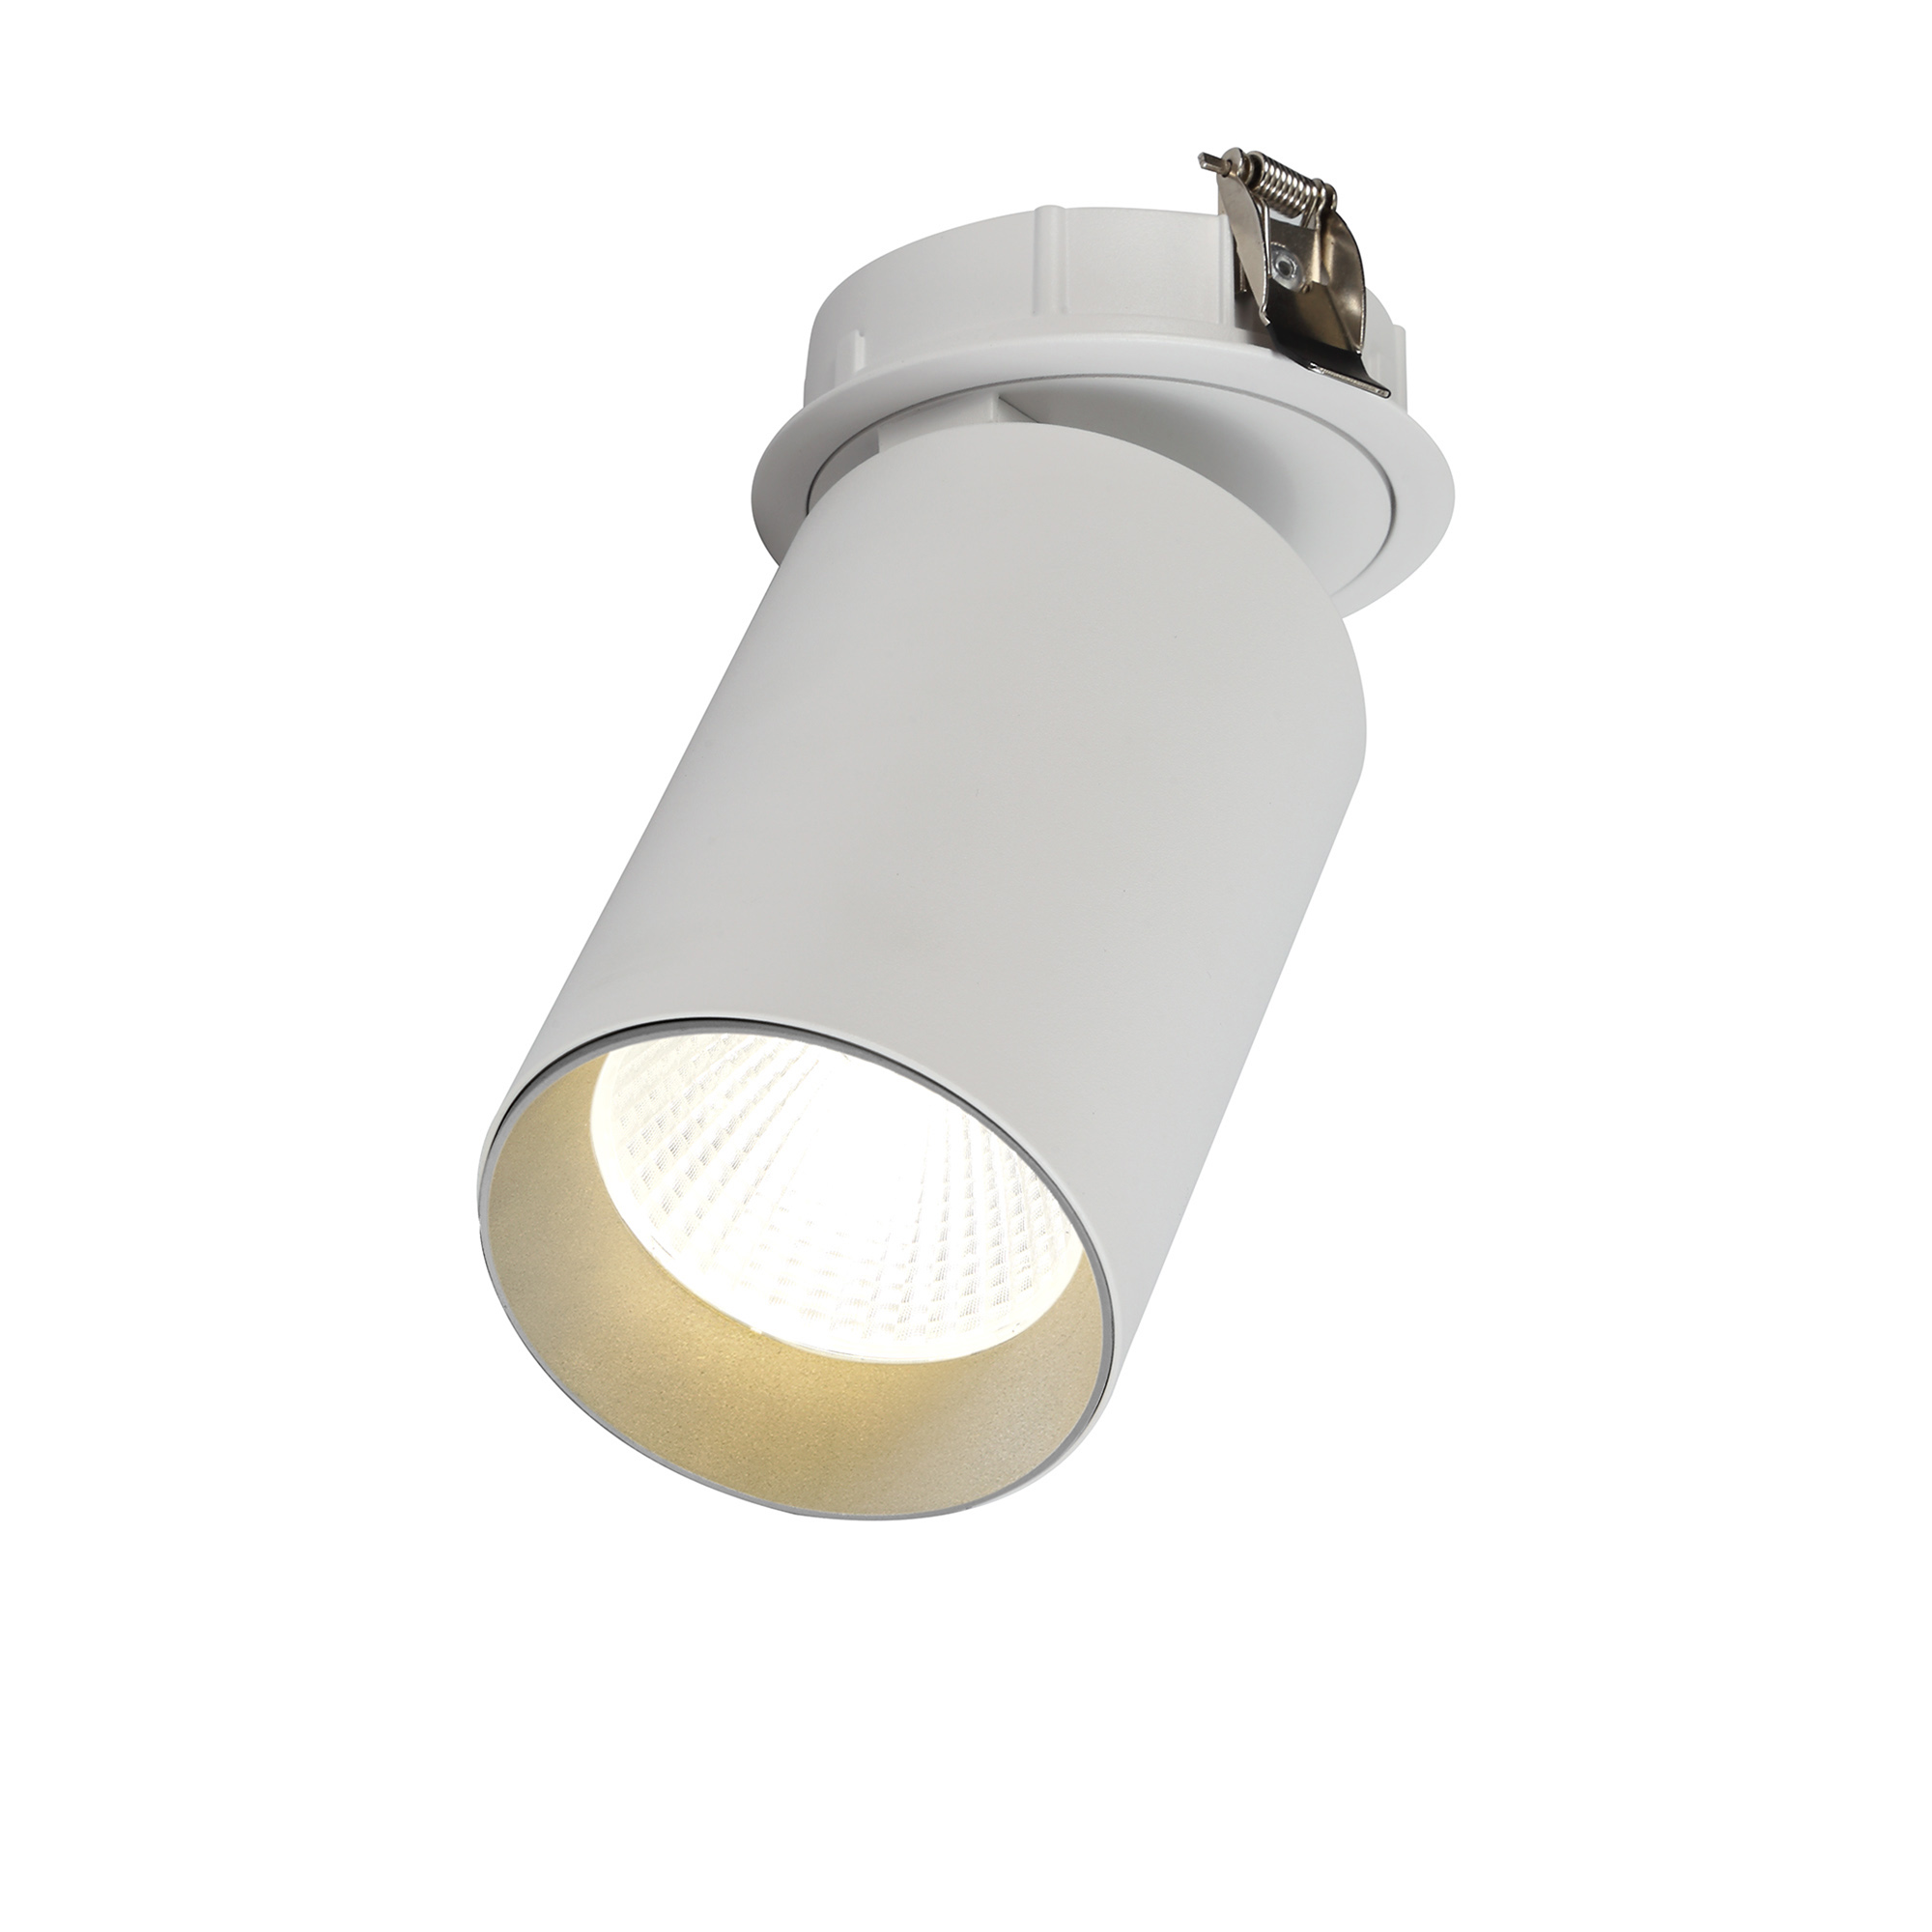 DX170009  Eos A 20; White & Silver; Recessed Base LED Spotlight; C/W 20W 450mA Driver; WITHOUT LED Engine; IP20; 5yrs Warranty